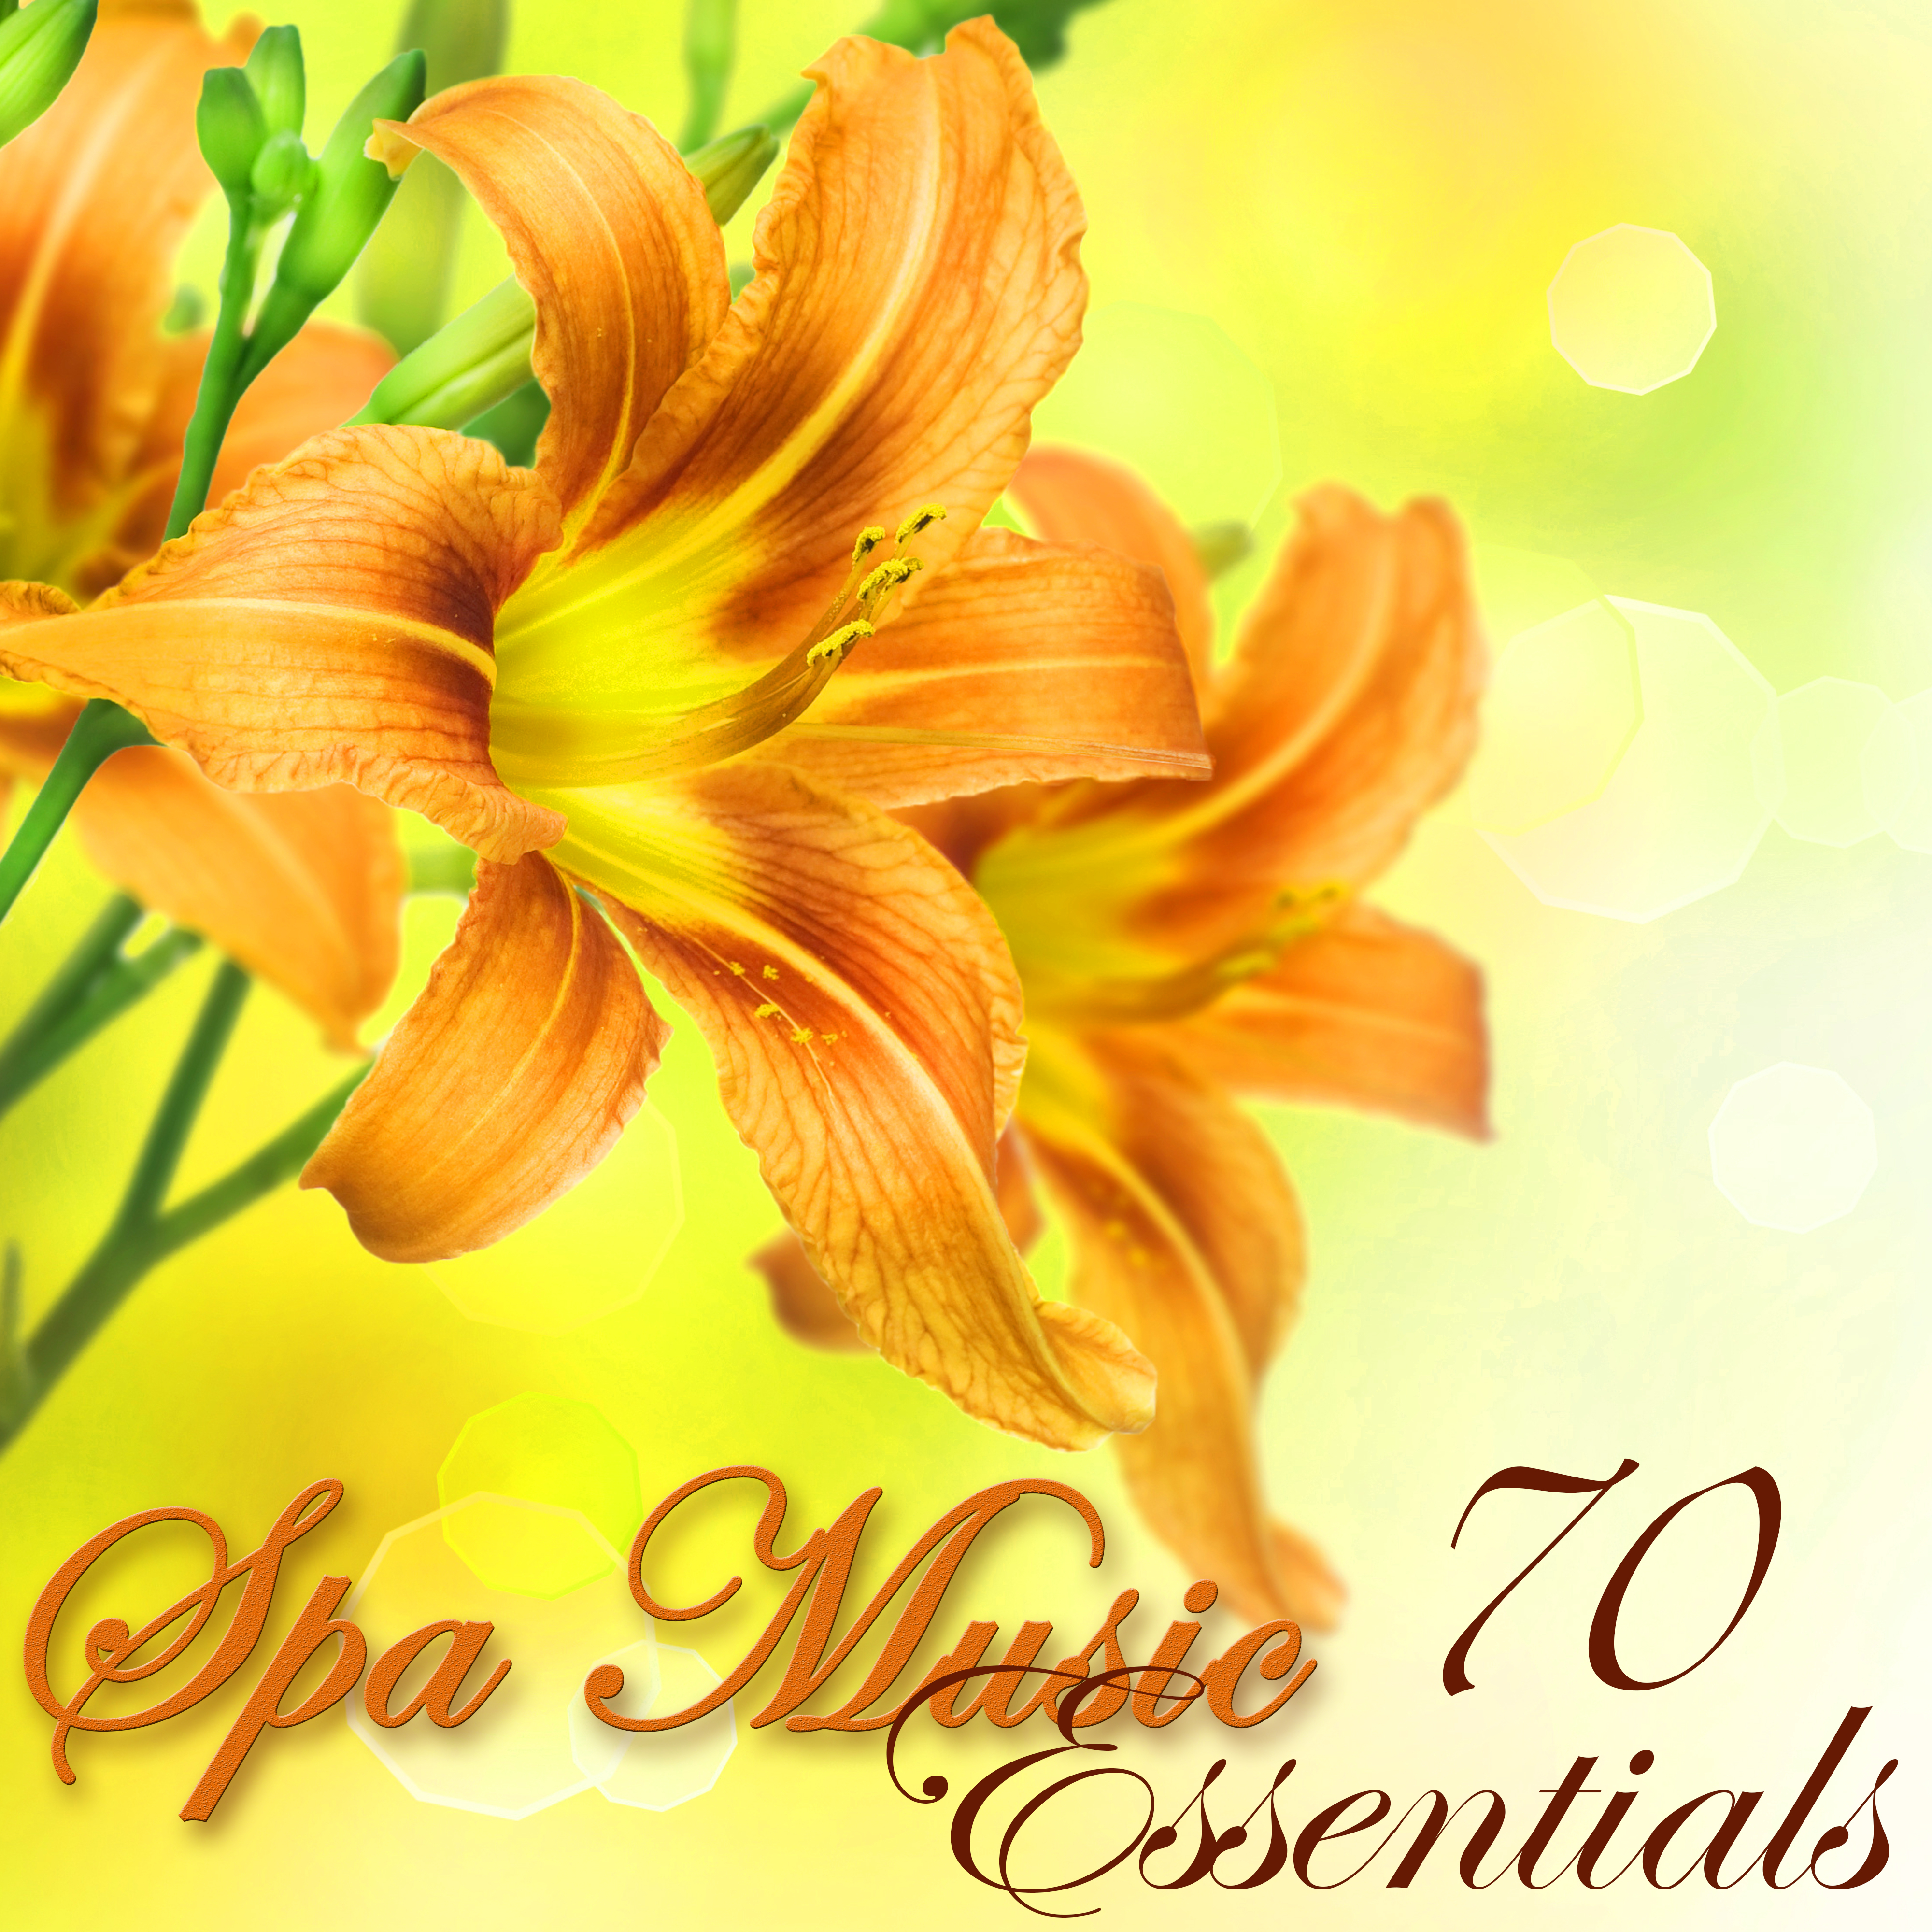 Spa Music Essentials  70 Soothing Spa Sounds for Wellness, Massage, Relaxation, Body Detox, Weight Loss Yoga and Bikini Body Spa Treatments